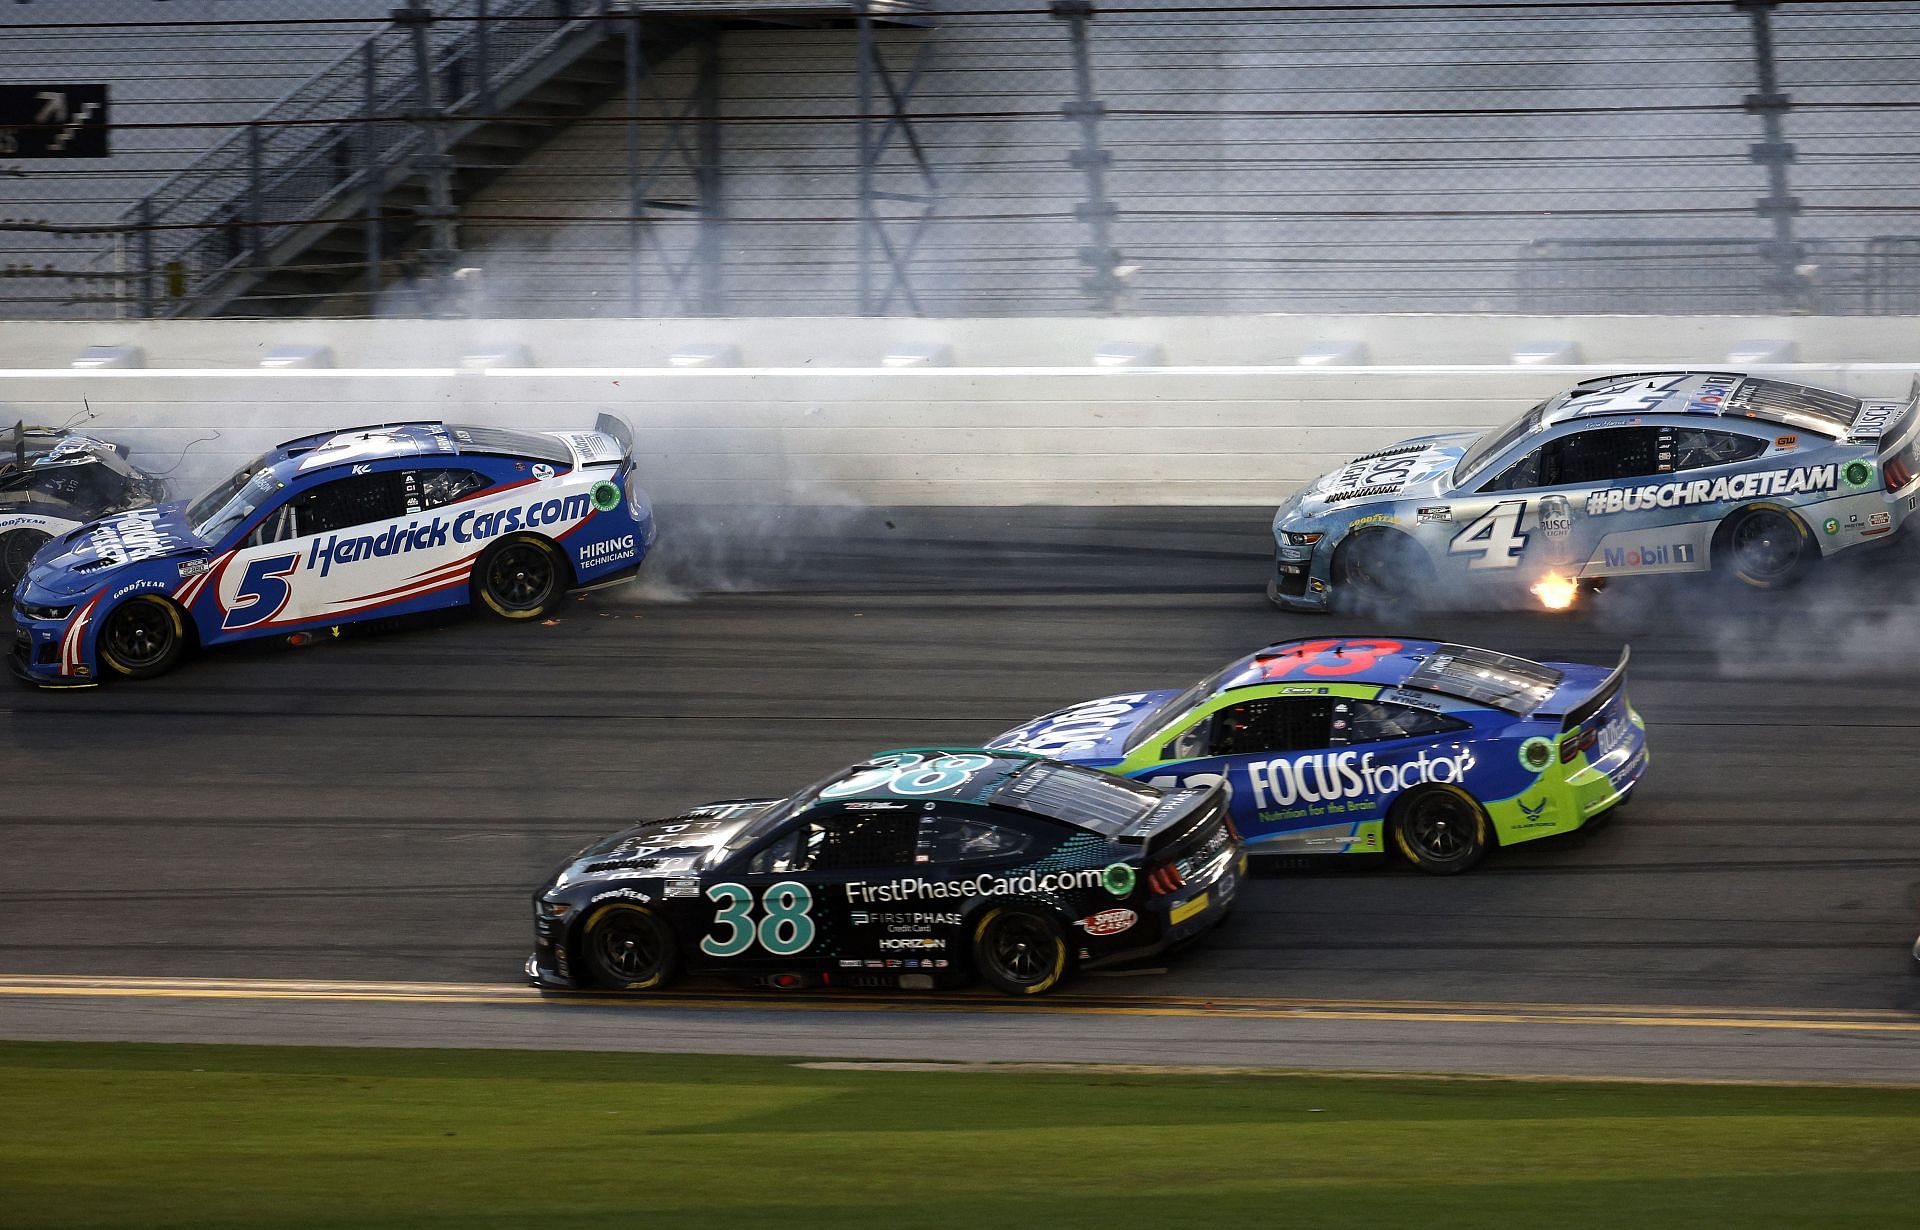 Todd Gilliland was out of the race after being in a crash that also involved Chase Elliot and Kyle Larson amongst others. (Photo by Chris Graythen/Getty Images)